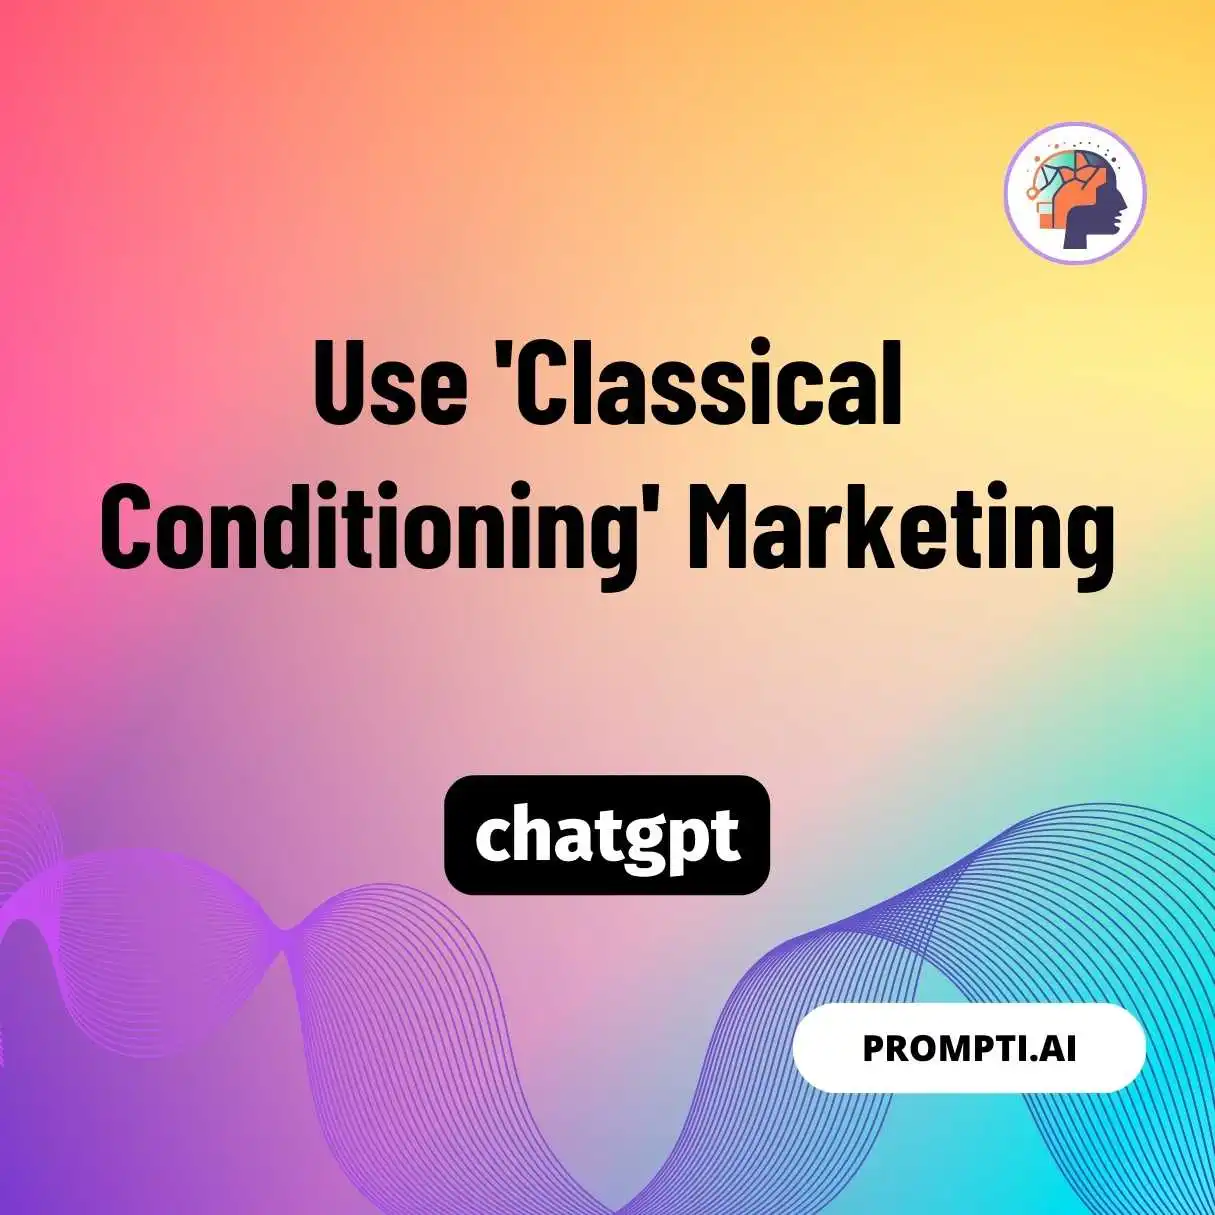 Use ‘Classical Conditioning’ Marketing